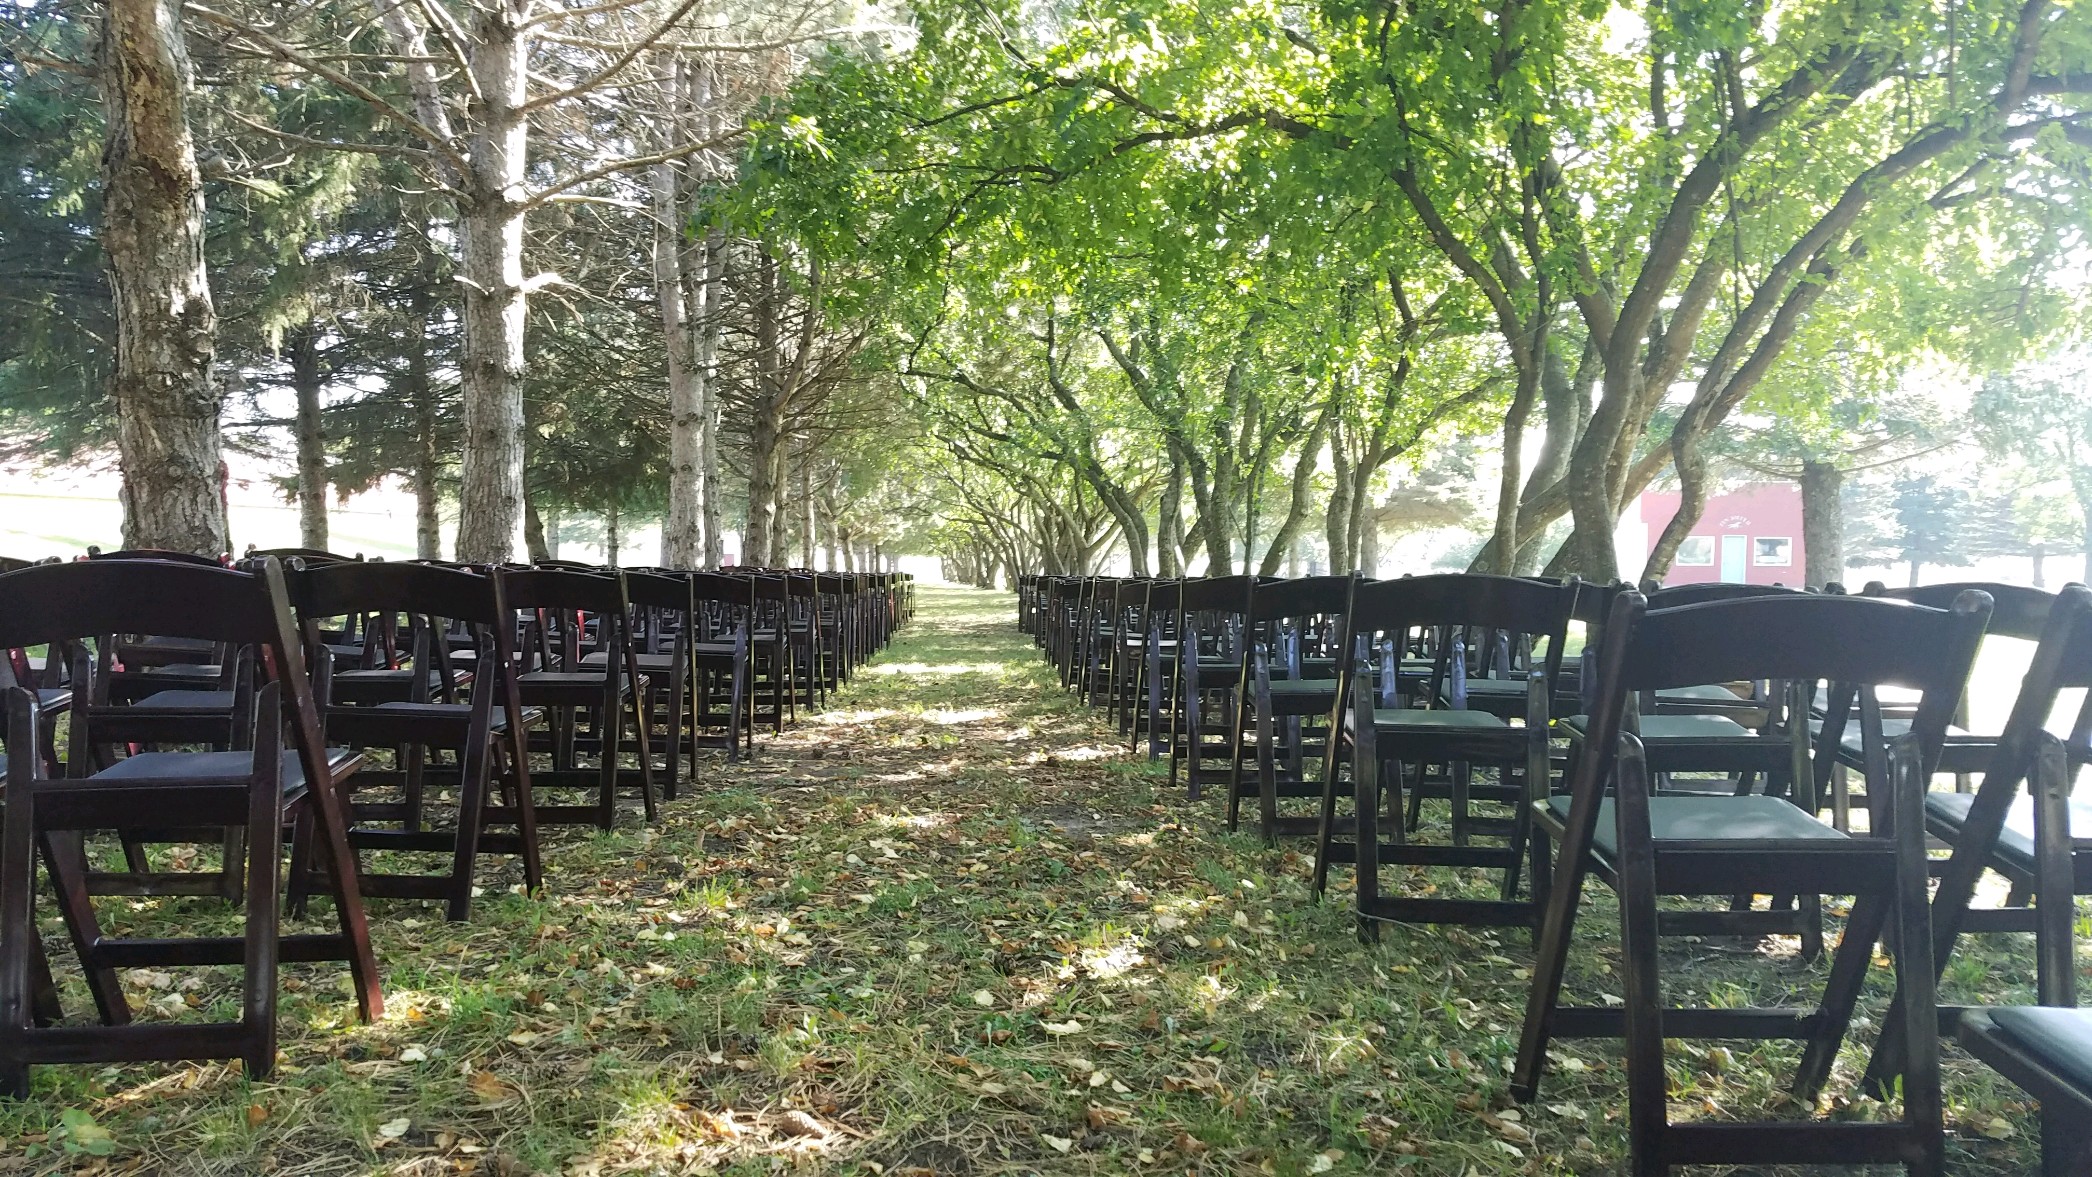   Worry-free wedding rentals    From start to finish.  